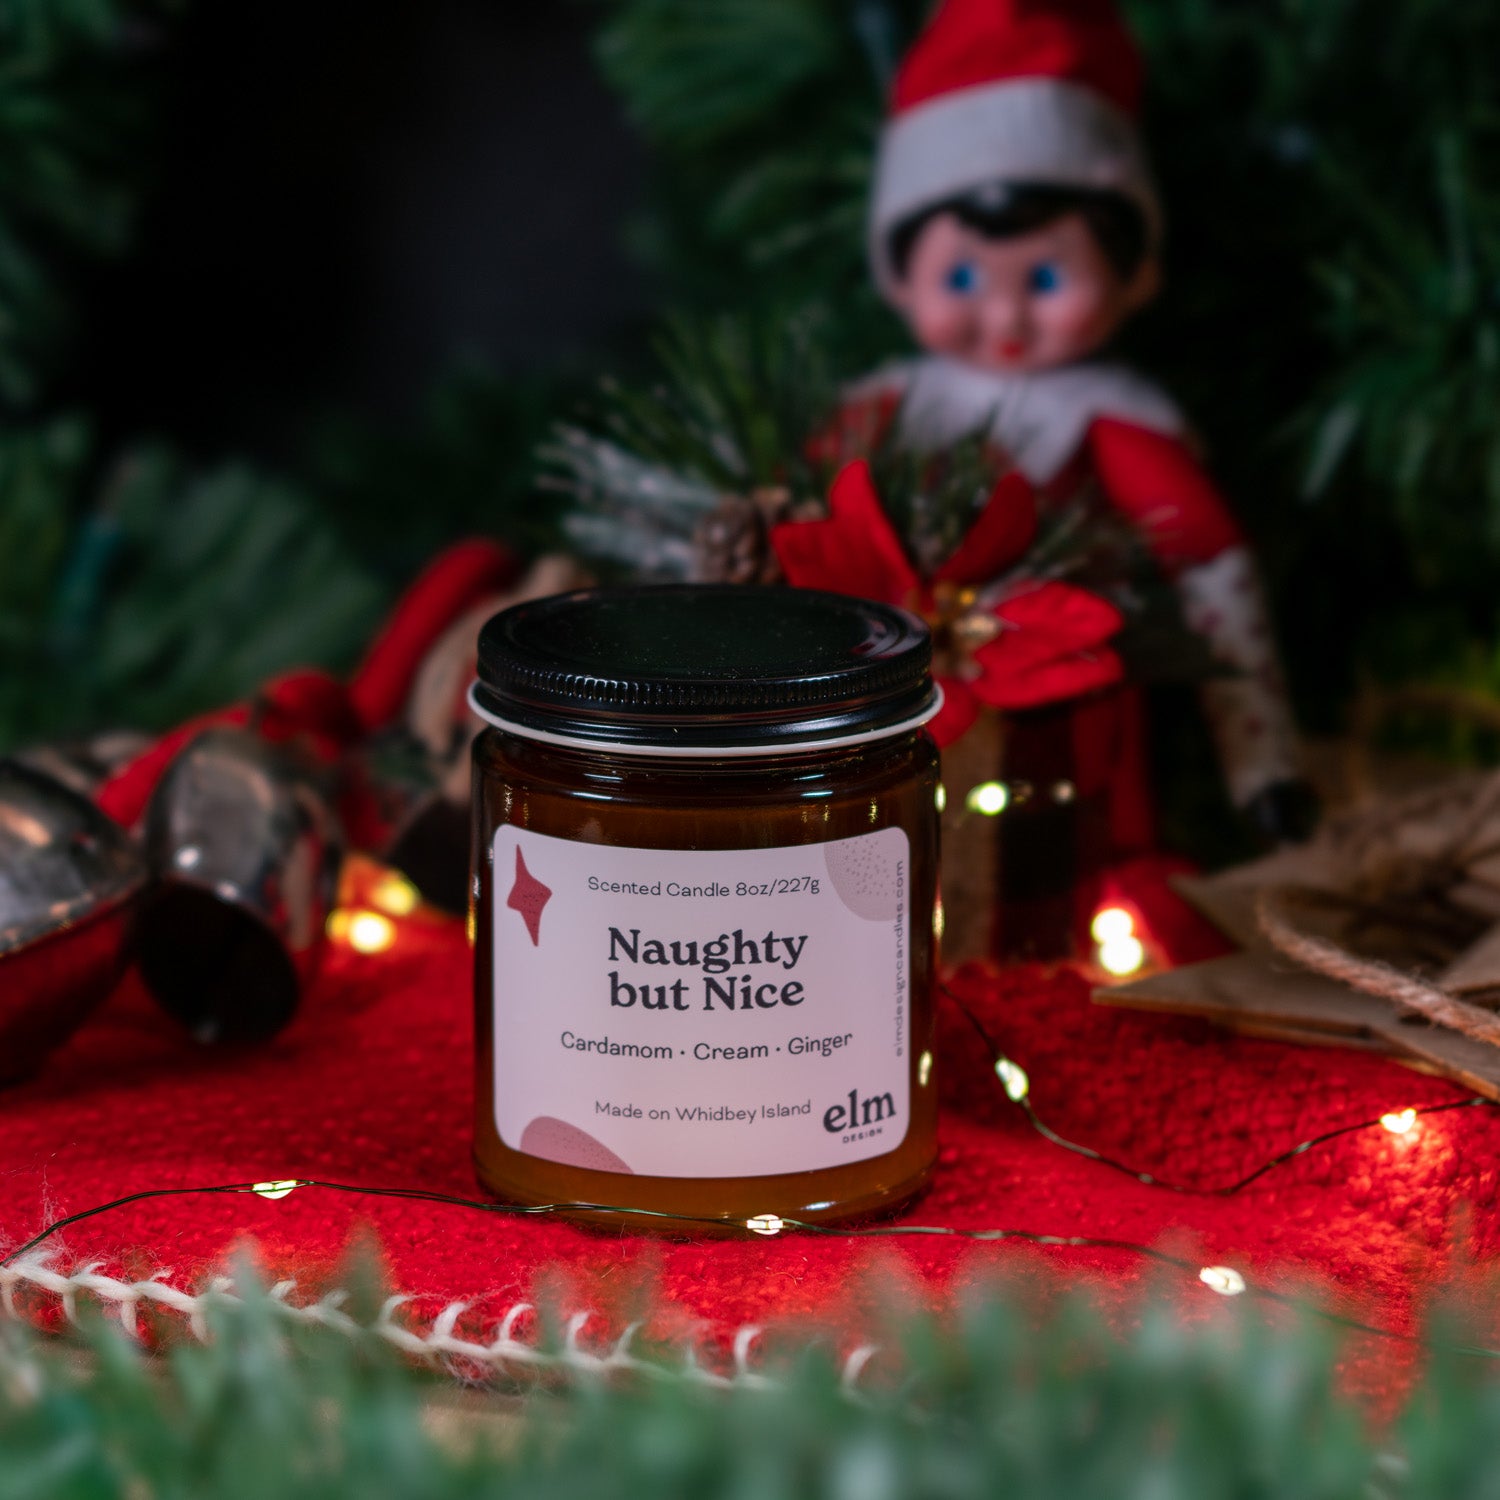 Naughty but Nice scented soy candle in colorfully labeled 8 oz container.